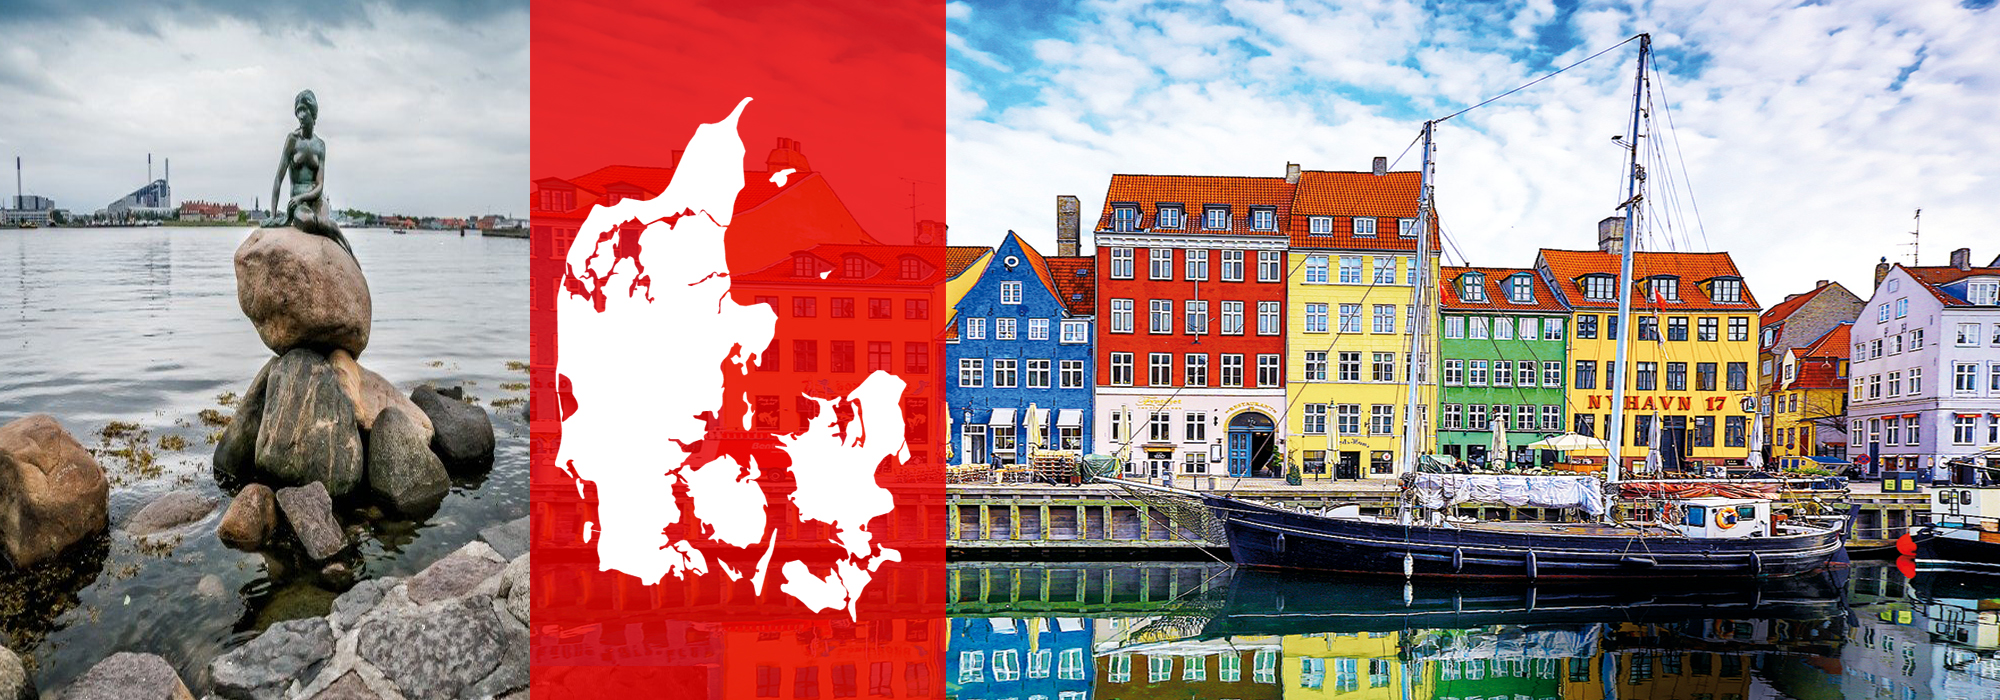 Collage of Danish sites with waterfront sculpture, map of Denmark, and colorful houses near a canal.